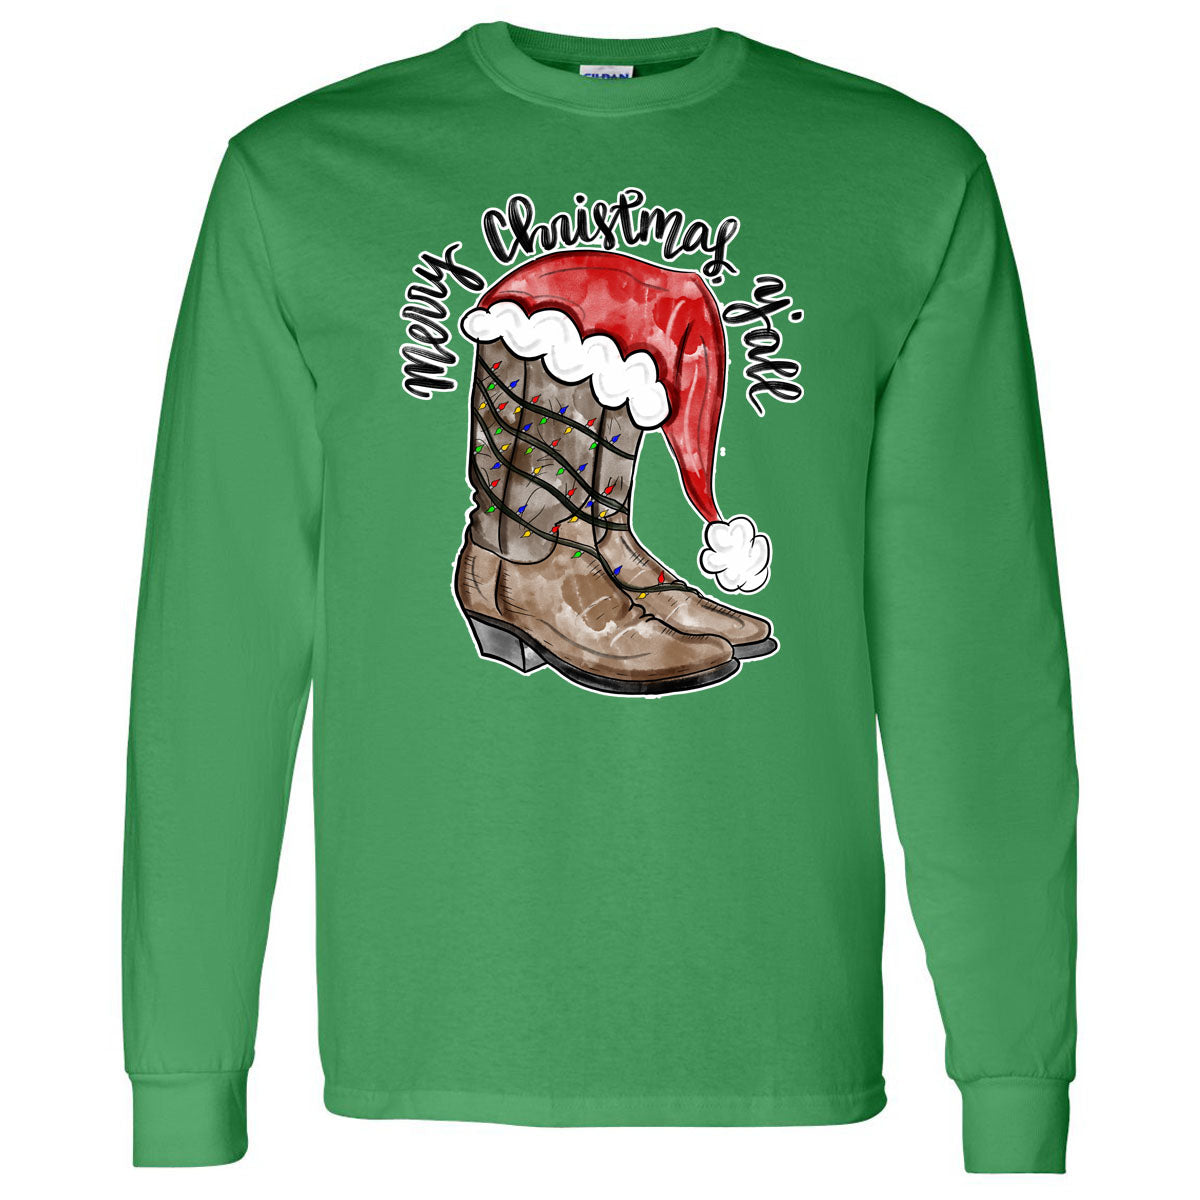 Merry Christmas Y'all Cowboy Boots - Green Longsleeve Tee - Southern Grace Creations